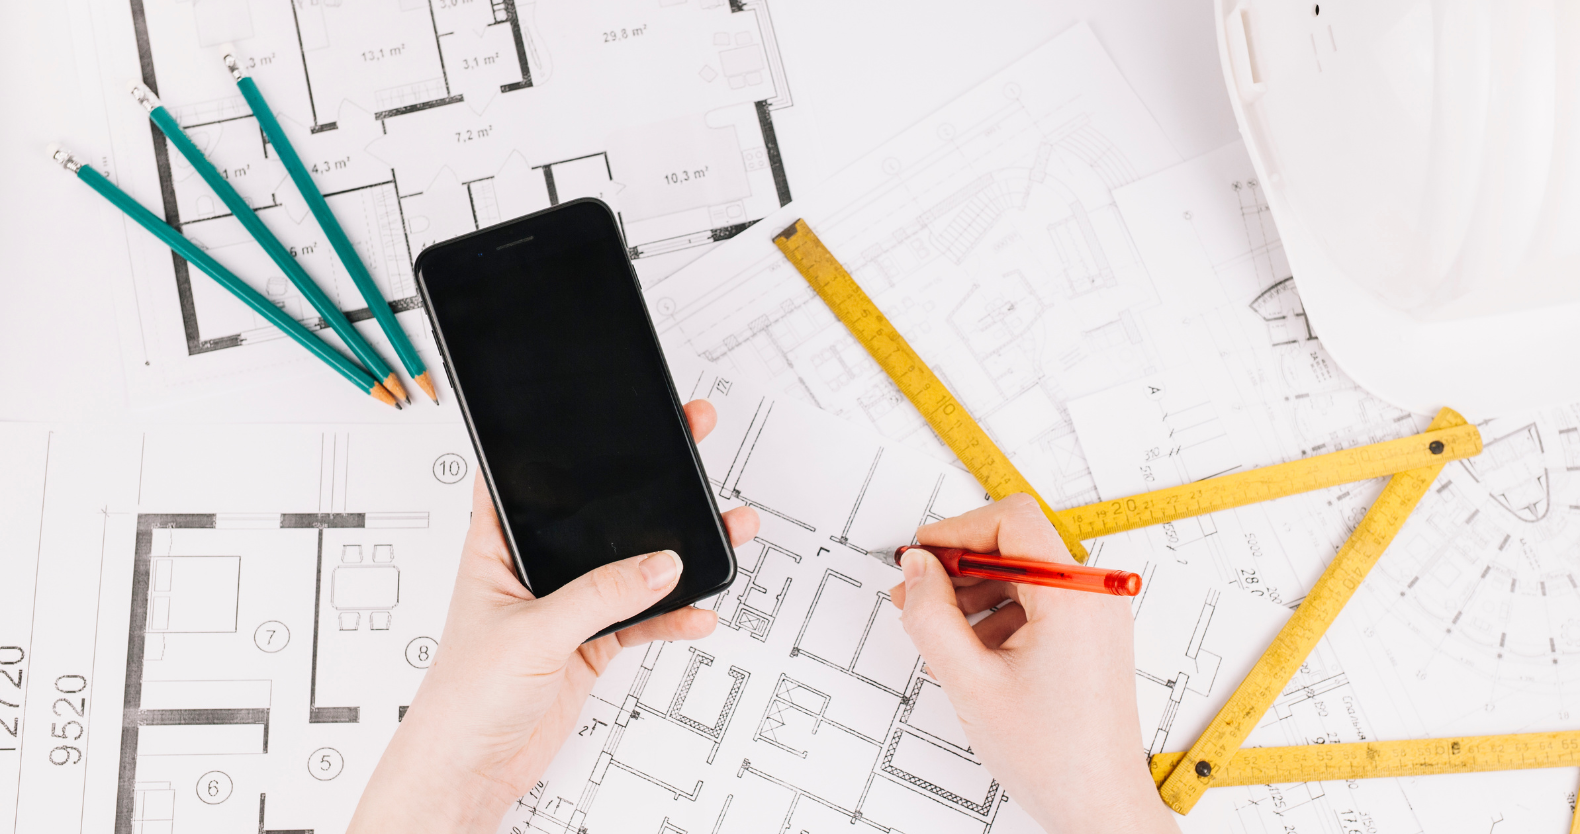 How Do I Find An Architect To Design My Home